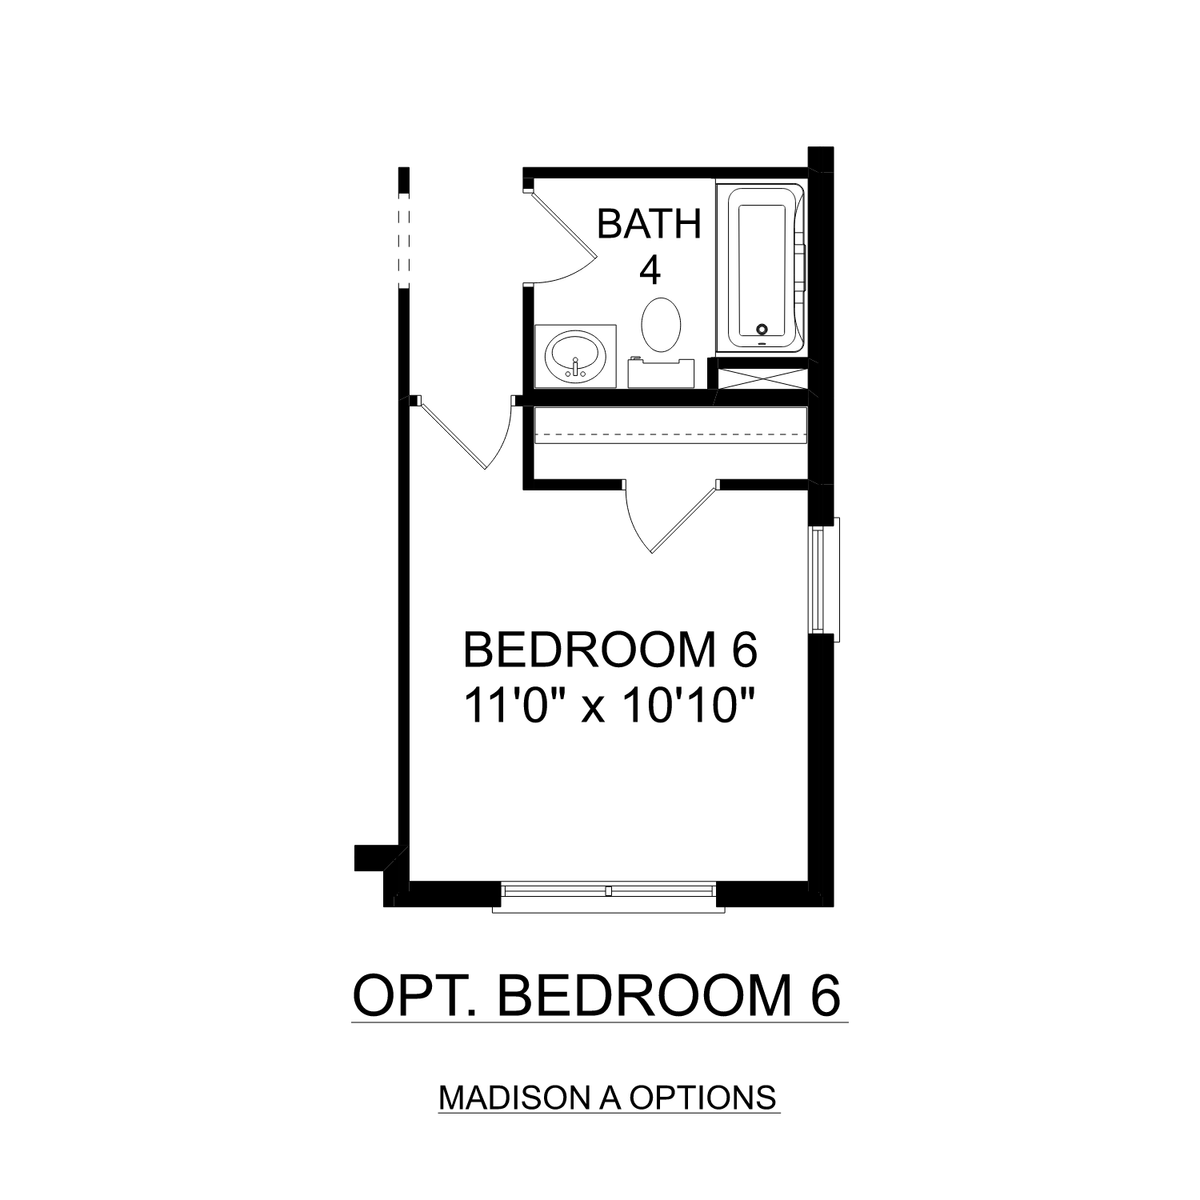 3 - The Madison A floor plan layout for 29512 Limestone Creek Way in Davidson Homes' Creekside community.